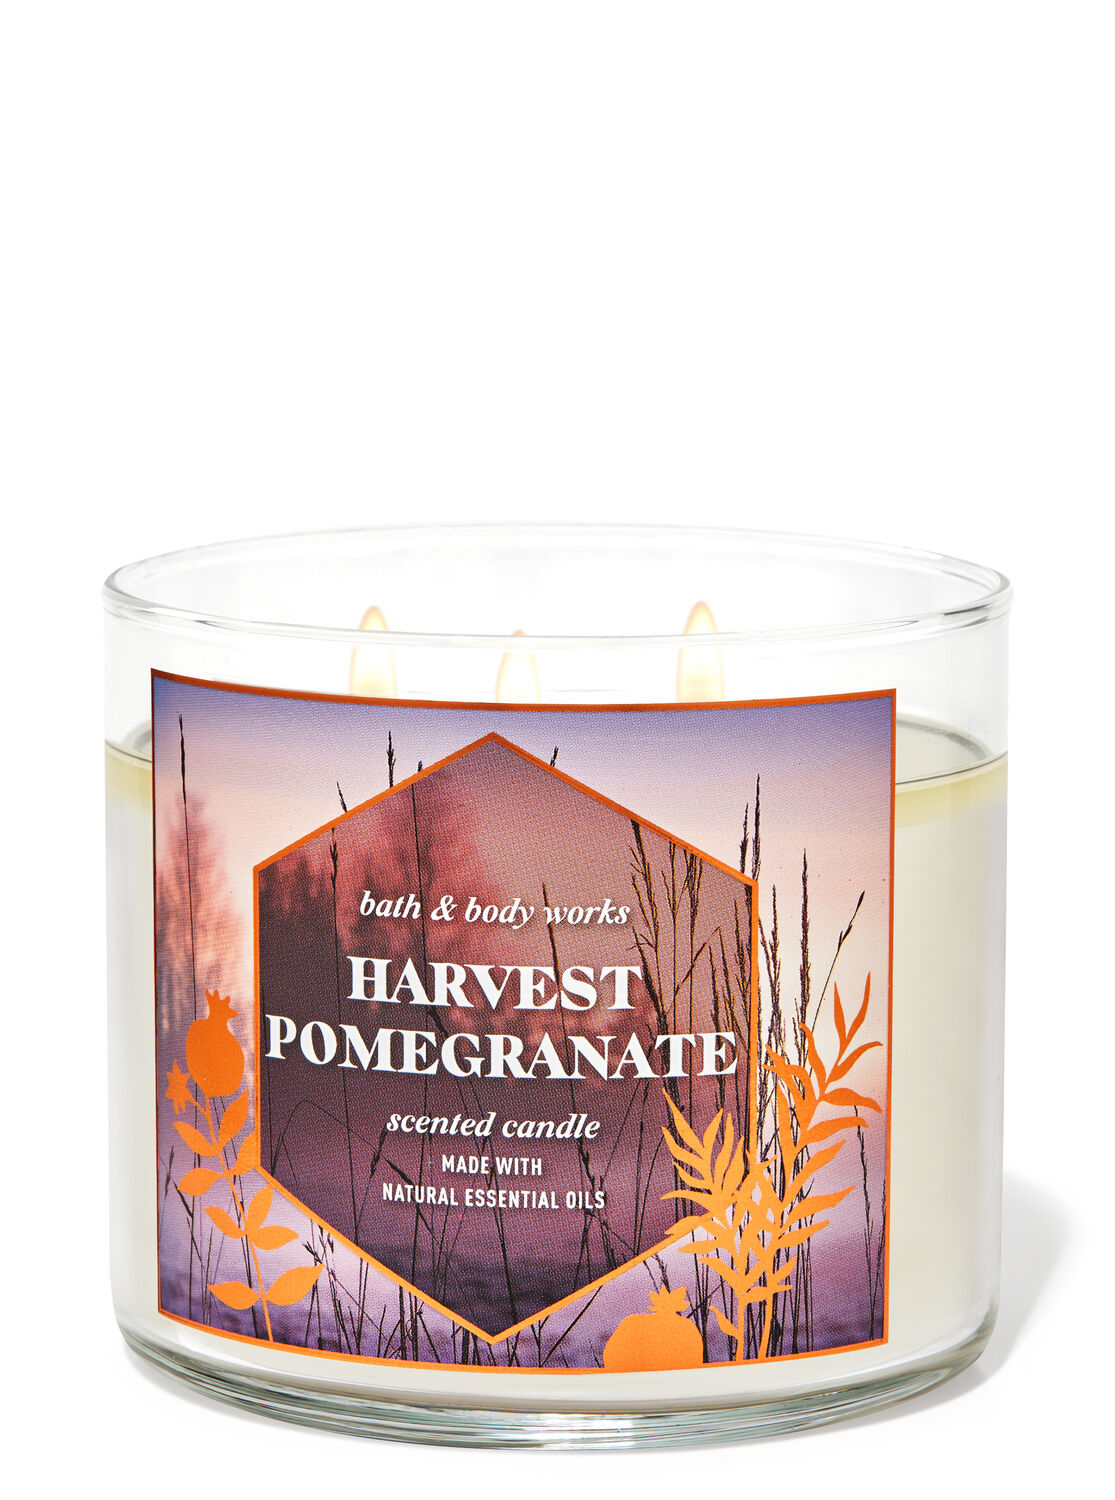 Bath & Body Works Pomegranate Large 3 Wick Scented Candle candles 14.5 oz Large 